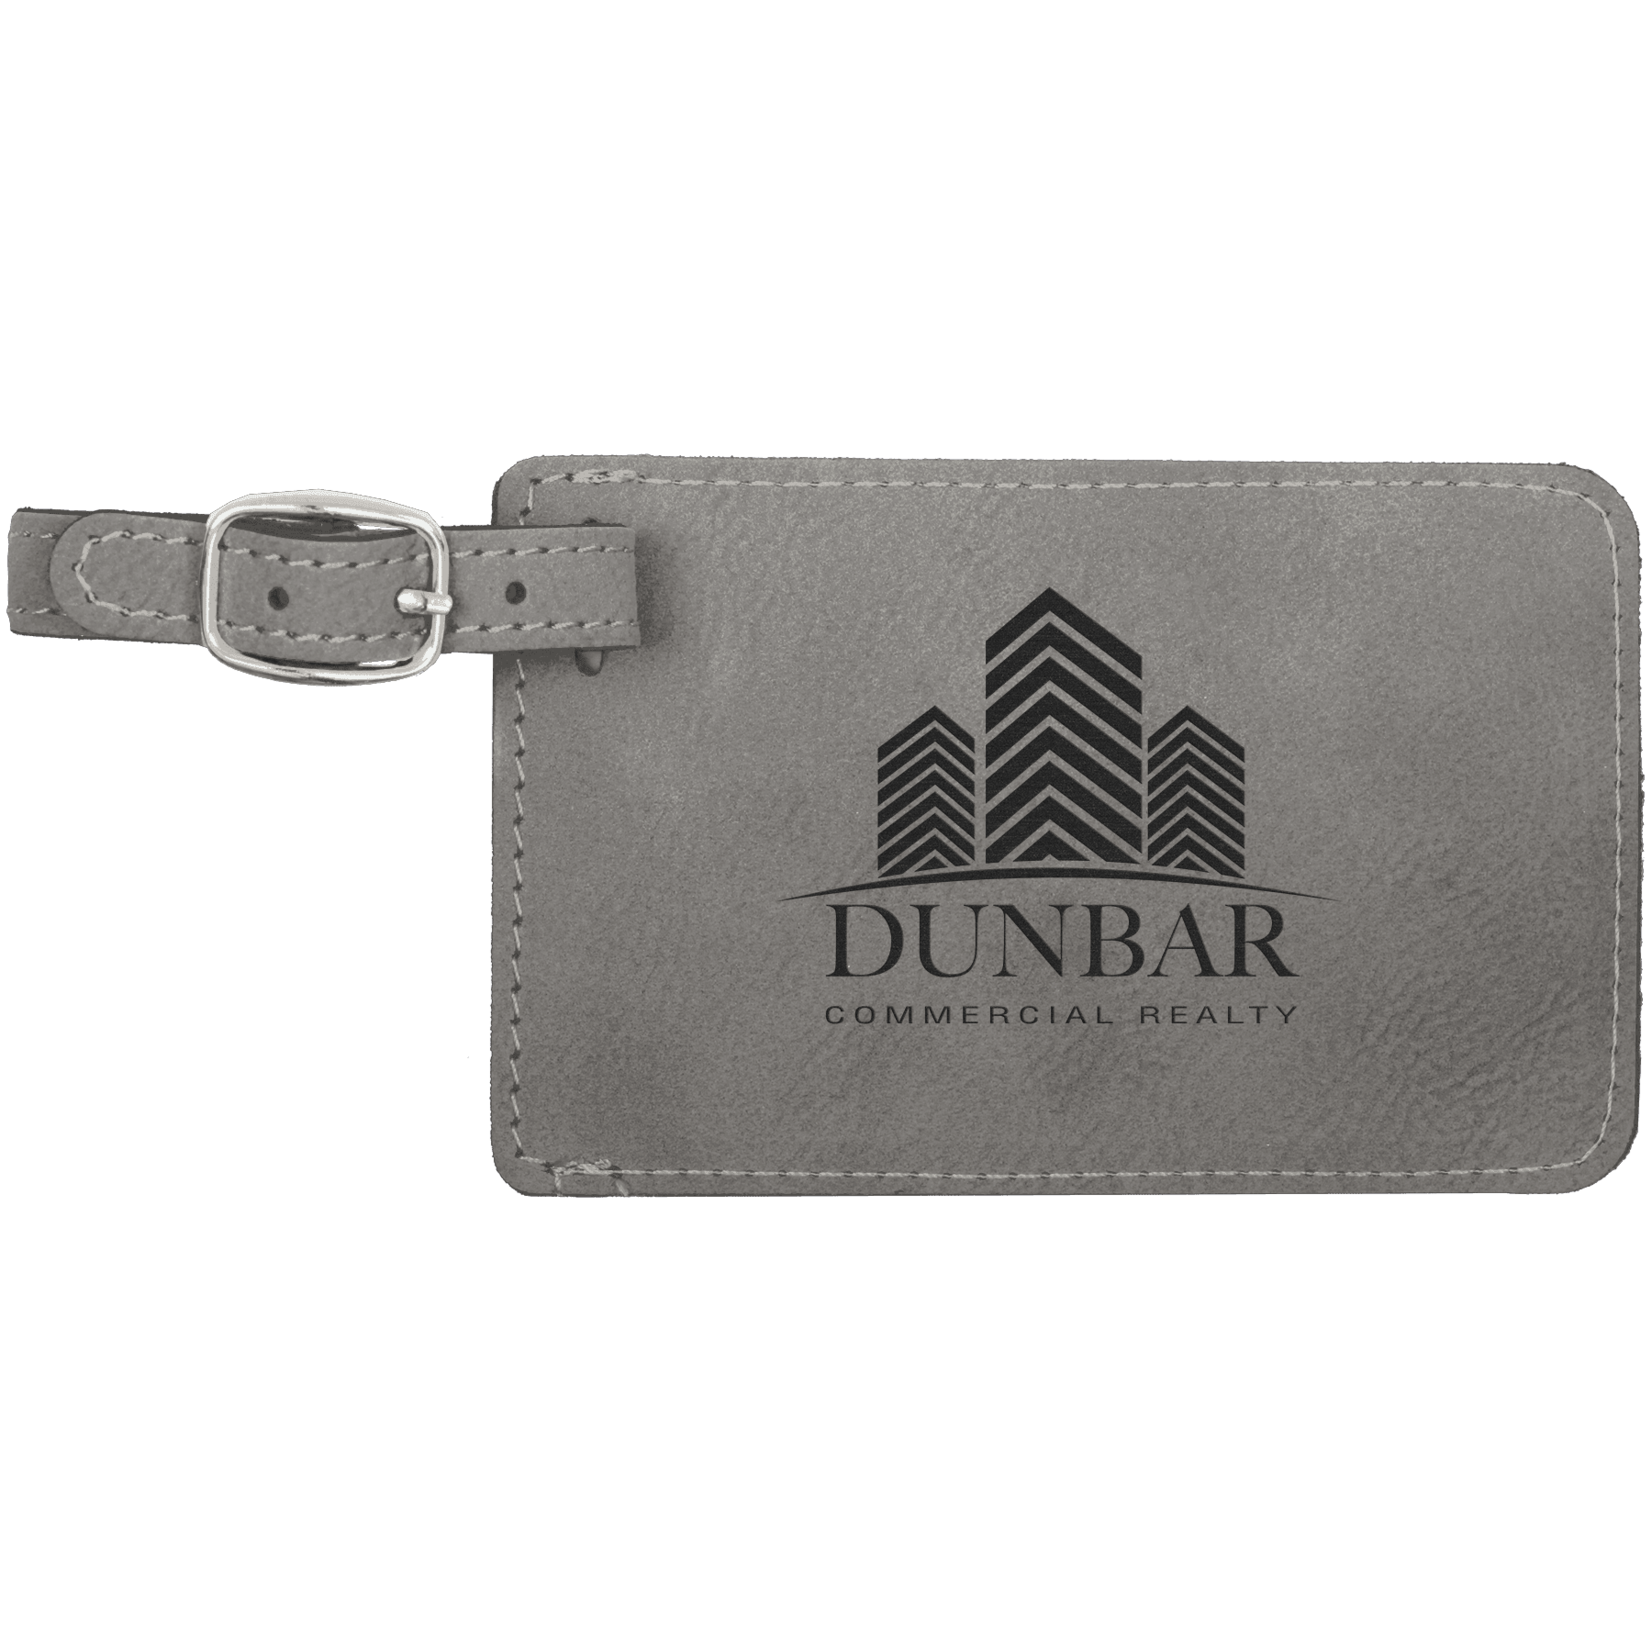 JDS Industries gft368 Gray Luggage Tag w/ engraving